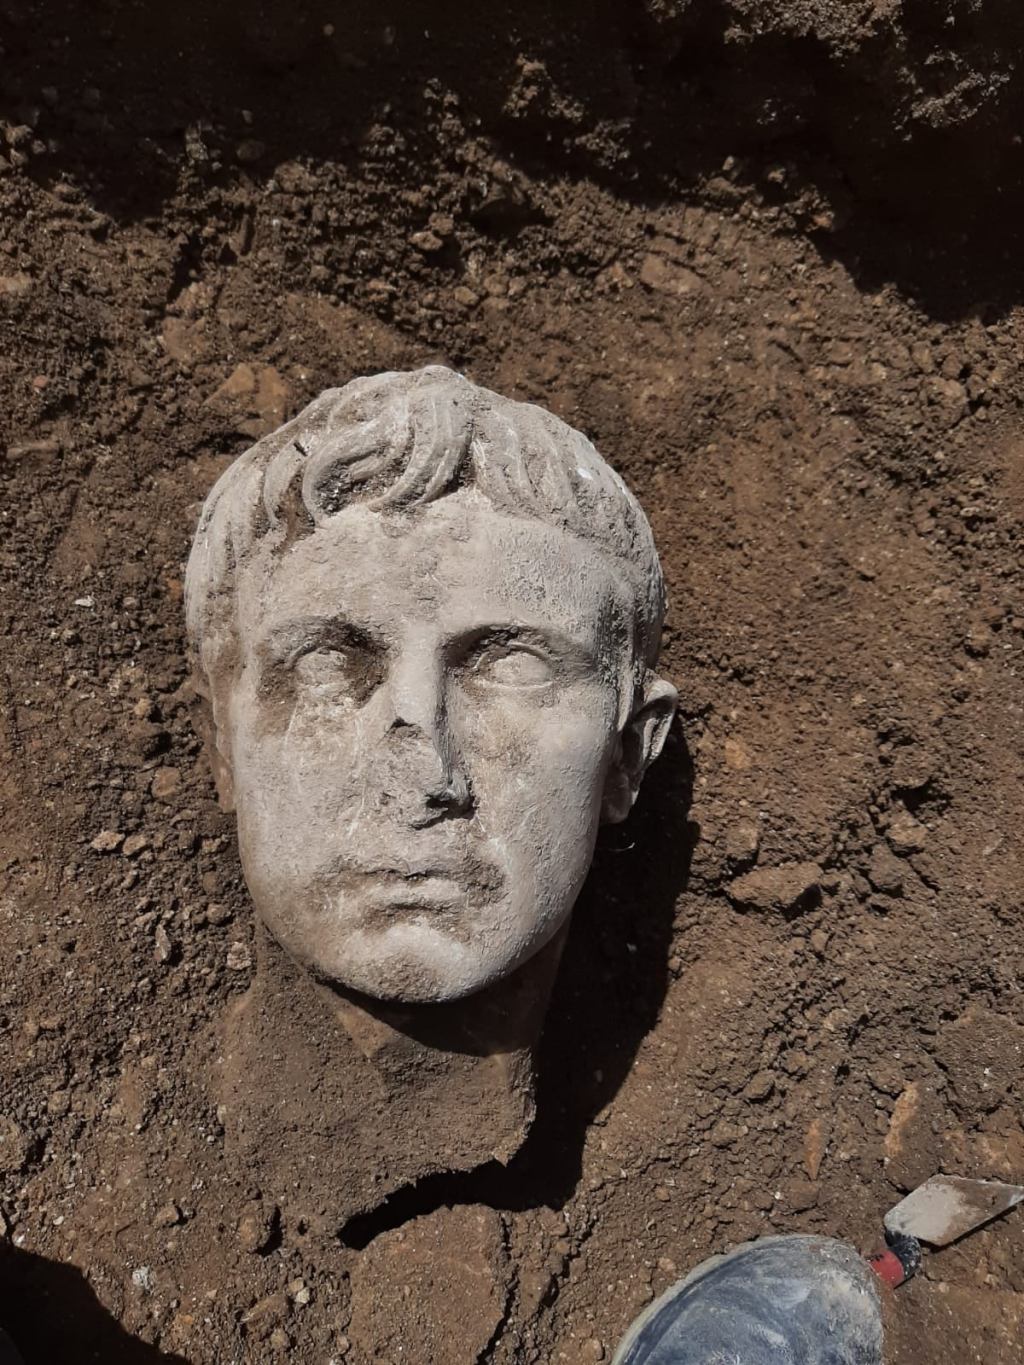 Archaeologists Find Marble Head of Roman Emperor Augustus in Italian Town